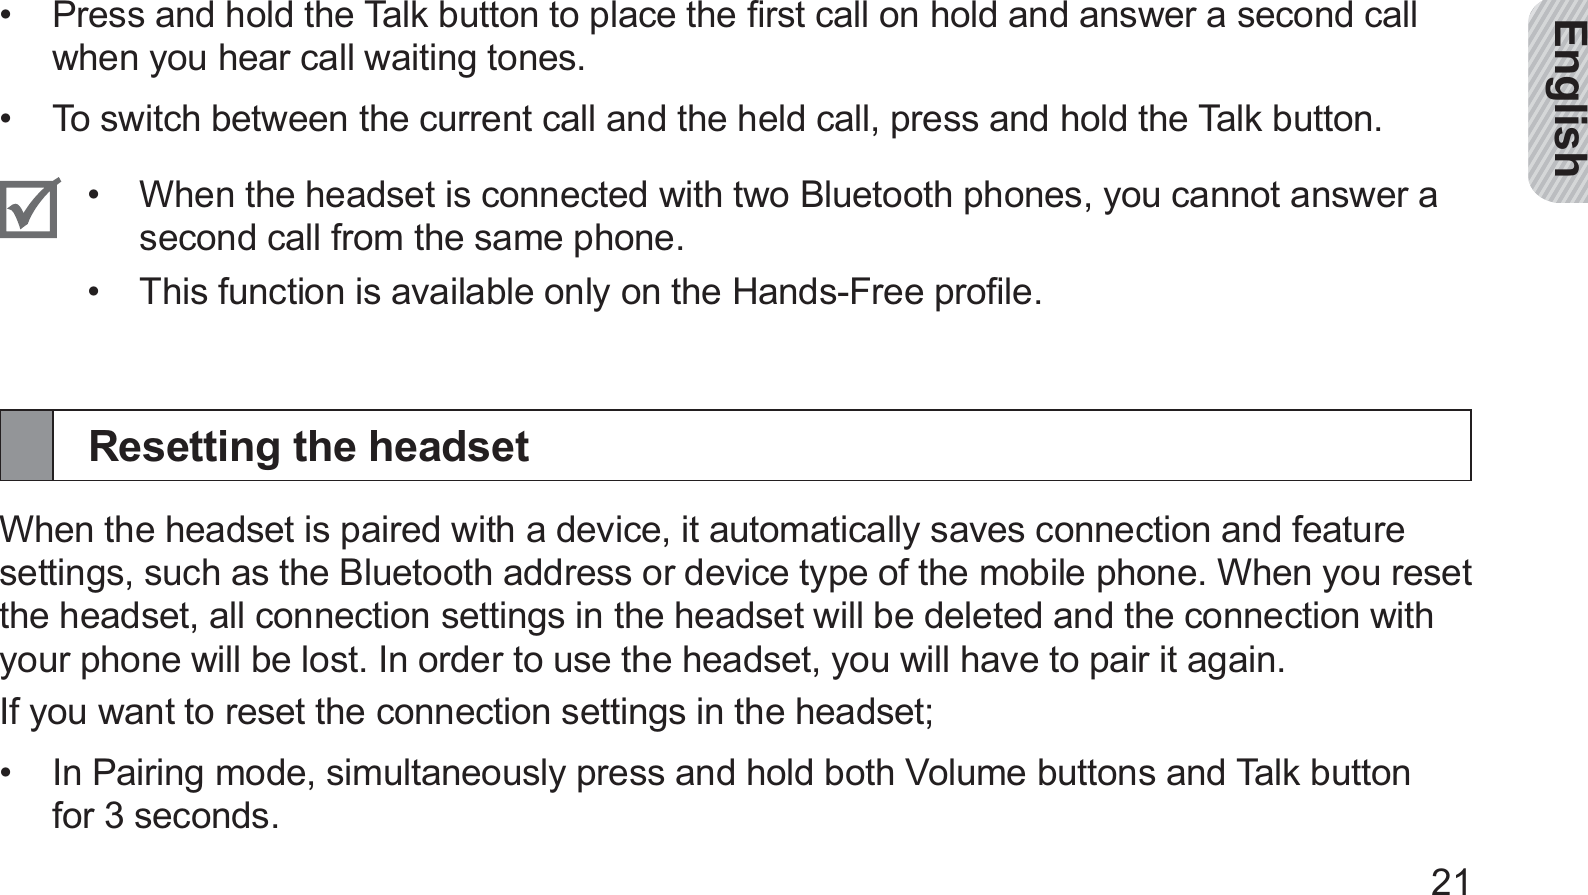 English21Press and hold the Talk button to place the ﬁrst call on hold and answer a second call • when you hear call waiting tones.To switch between the current call and the held call, press and hold the Talk button.• When the headset is connected with two Bluetooth phones, you cannot answer a • second call from the same phone. This function is available only on the Hands-Free proﬁle.• Resetting the headsetWhen the headset is paired with a device, it automatically saves connection and feature settings, such as the Bluetooth address or device type of the mobile phone. When you reset the headset, all connection settings in the headset will be deleted and the connection with your phone will be lost. In order to use the headset, you will have to pair it again.If you want to reset the connection settings in the headset;In Pairing mode, simultaneously press and hold both Volume buttons and Talk button • for 3 seconds.